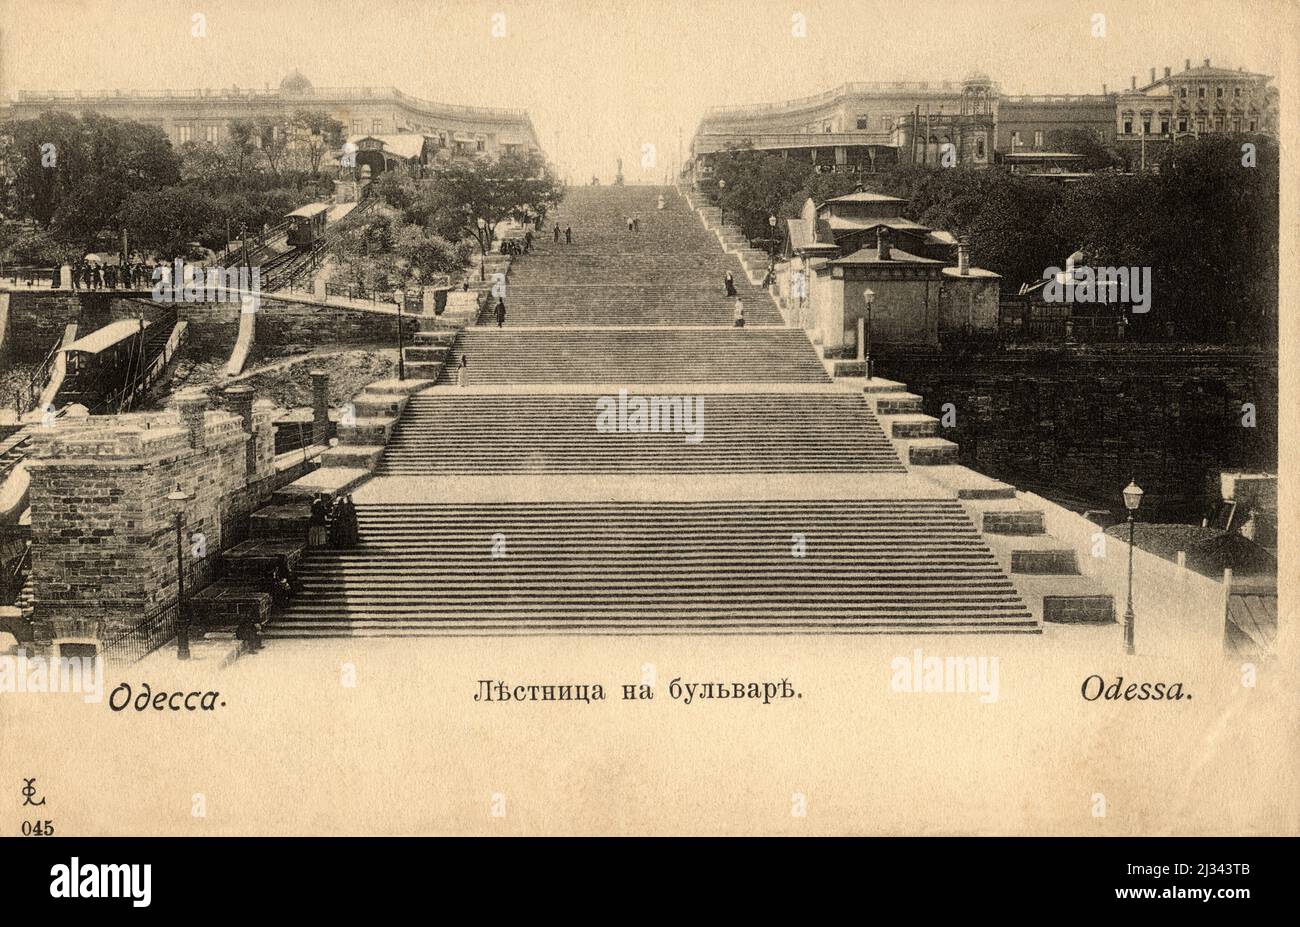 1900 ca , ODESSA , UKRAINE , RUSSIAN EMPIRE  : L'ESCALIER RICHELIEU .The 142-metre-long Potemkin Stairs ( constructed 1837–1841 ), which were famously featured in the 1925 film ' Battleship Potemkin ' by Sergei Eisenstein . hey are considered a formal entrance into the city from the direction of the sea and are the best known symbol of Odessa . The stairs were originally known as the Boulevard steps , the Giant Staircase,  or the Richelieu steps. The top step is 12.5 meters (41 feet) wide, and the lowest step is 21.7 meters (70.8 feet) wide. The staircase extends for 142 meters, but it gives t Stock Photo